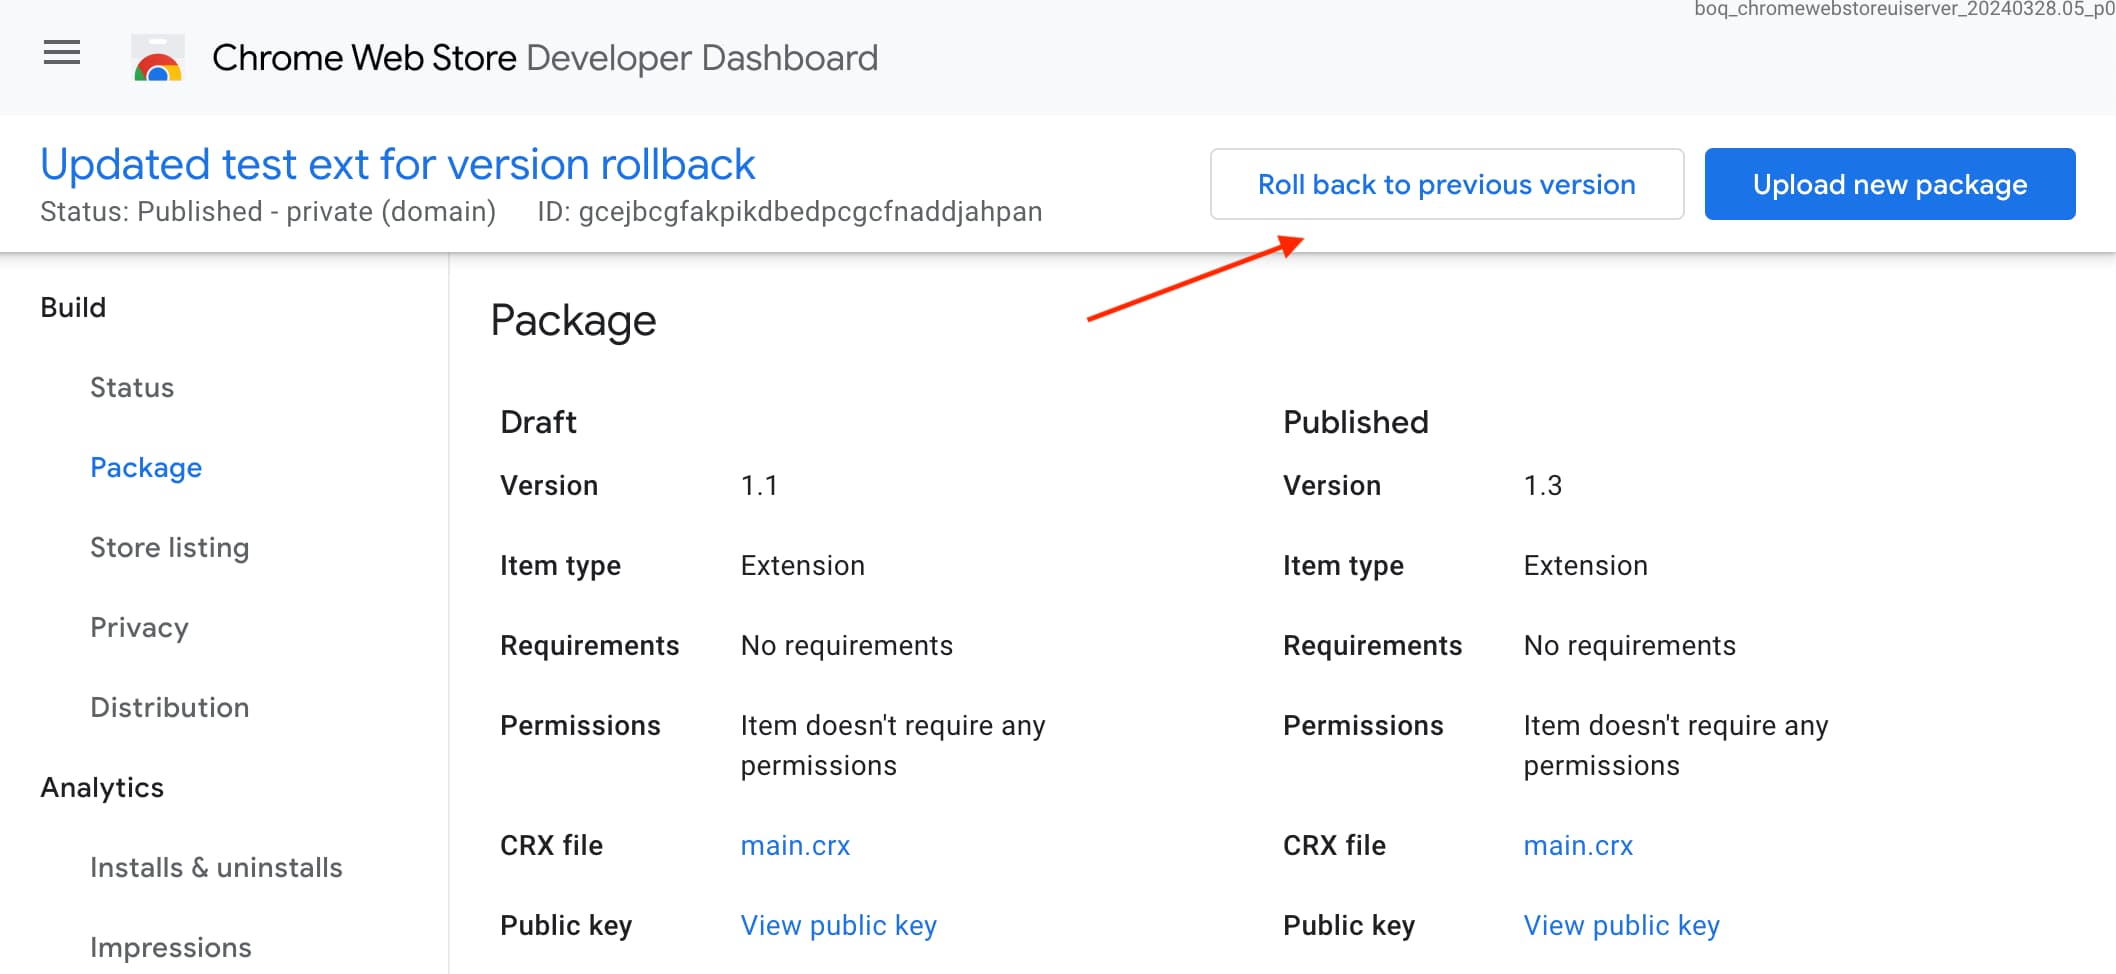 Screenshot of the Developer dashboard with the trigger rollback button.